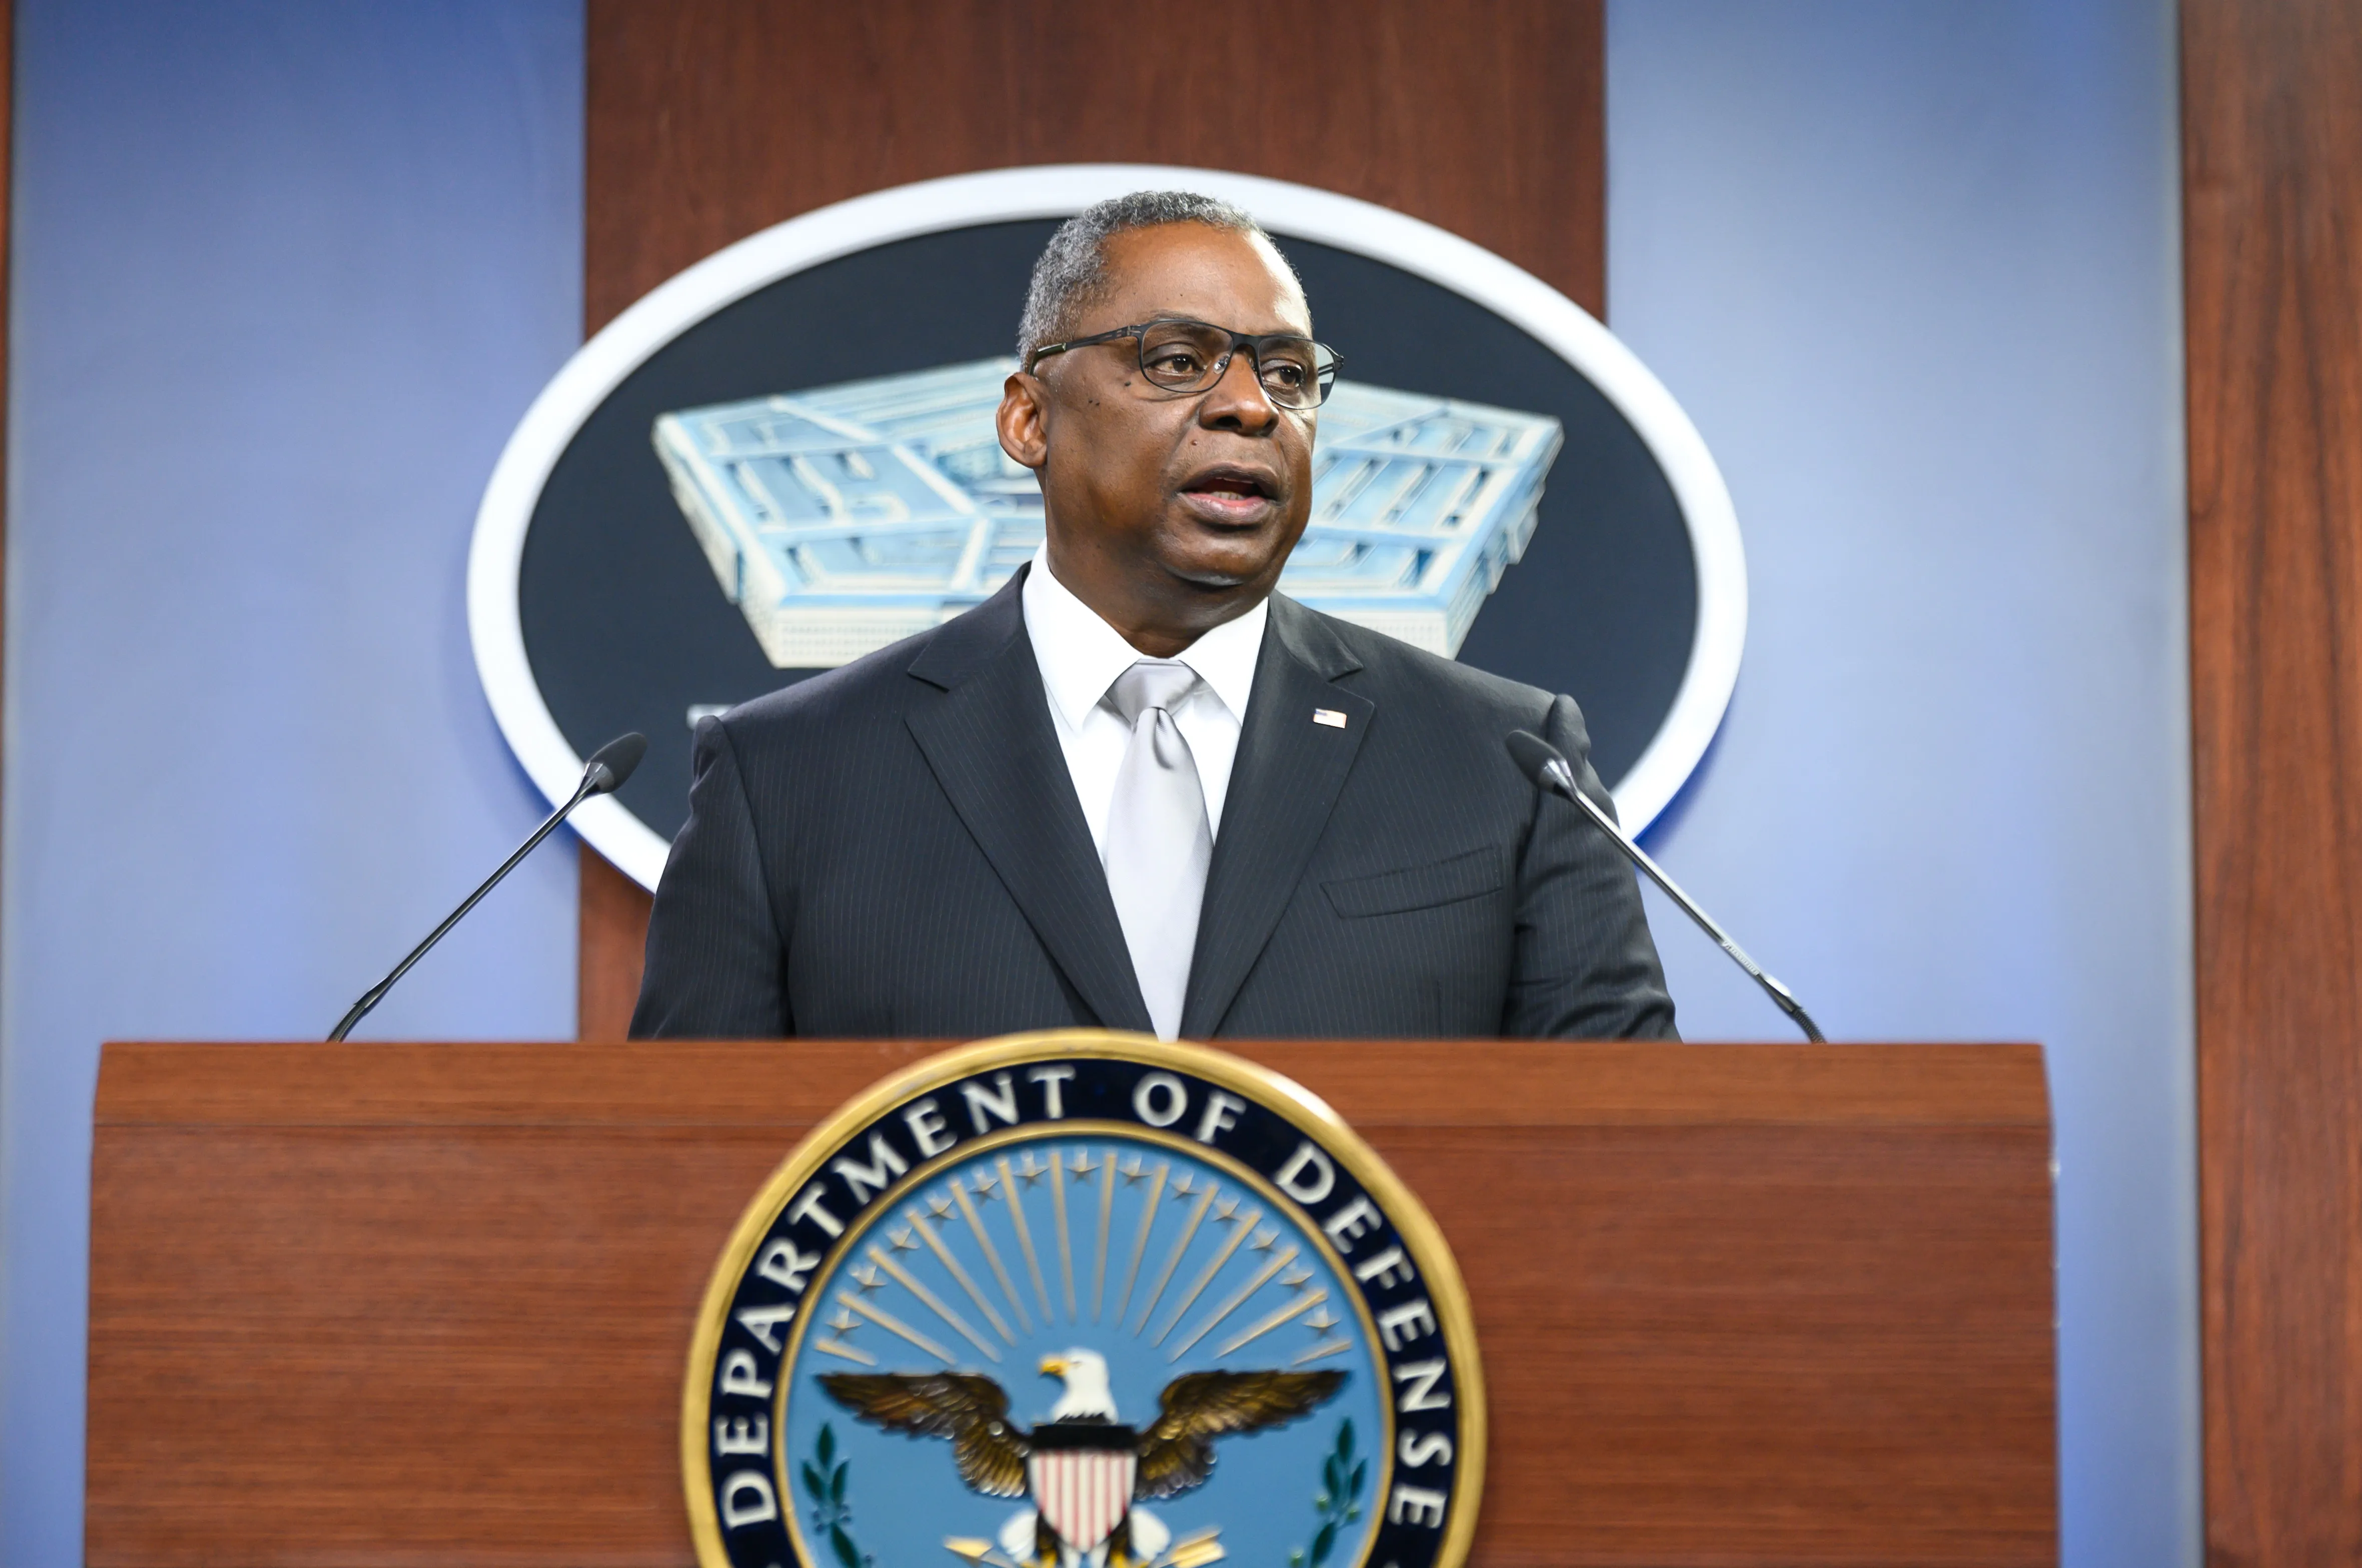 Defense Secretary Lloyd Austin issued a memorandum in 2022 announcing that the department would provide paid leave and reimbursement for travel expenses for service members who seek to obtain an abortion.?w=200&h=150